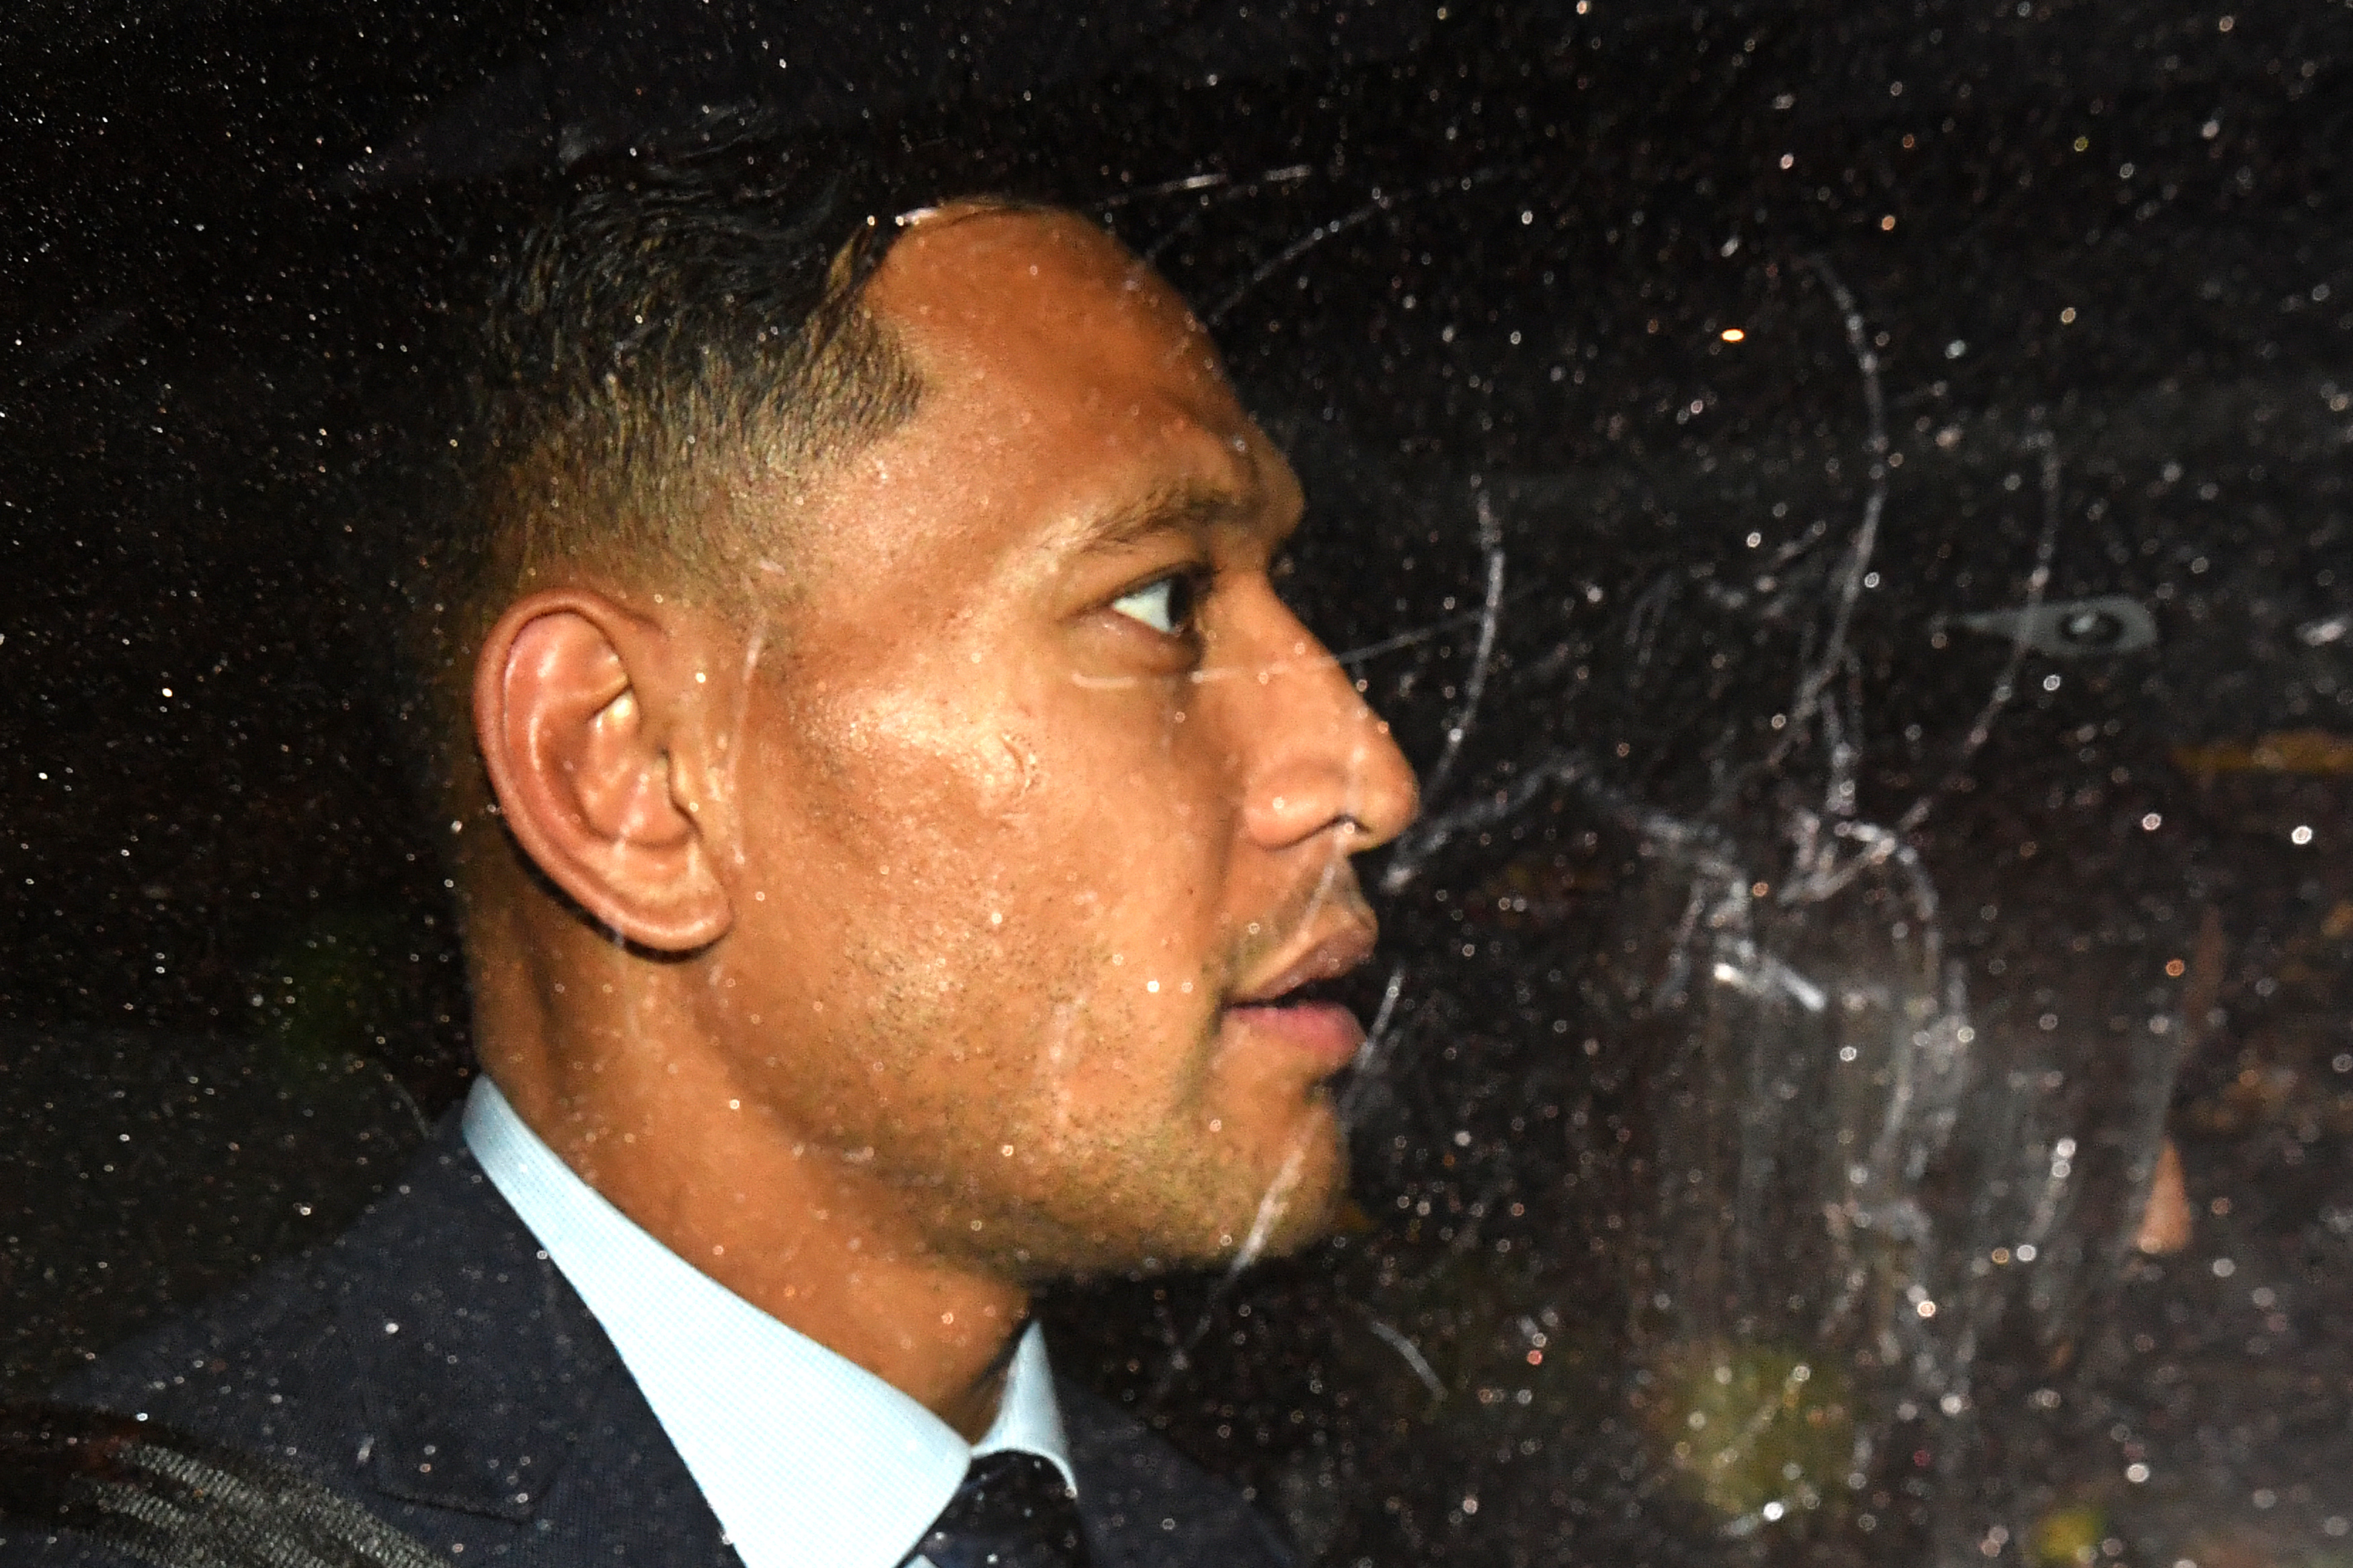 Israel Folau in the back of a car